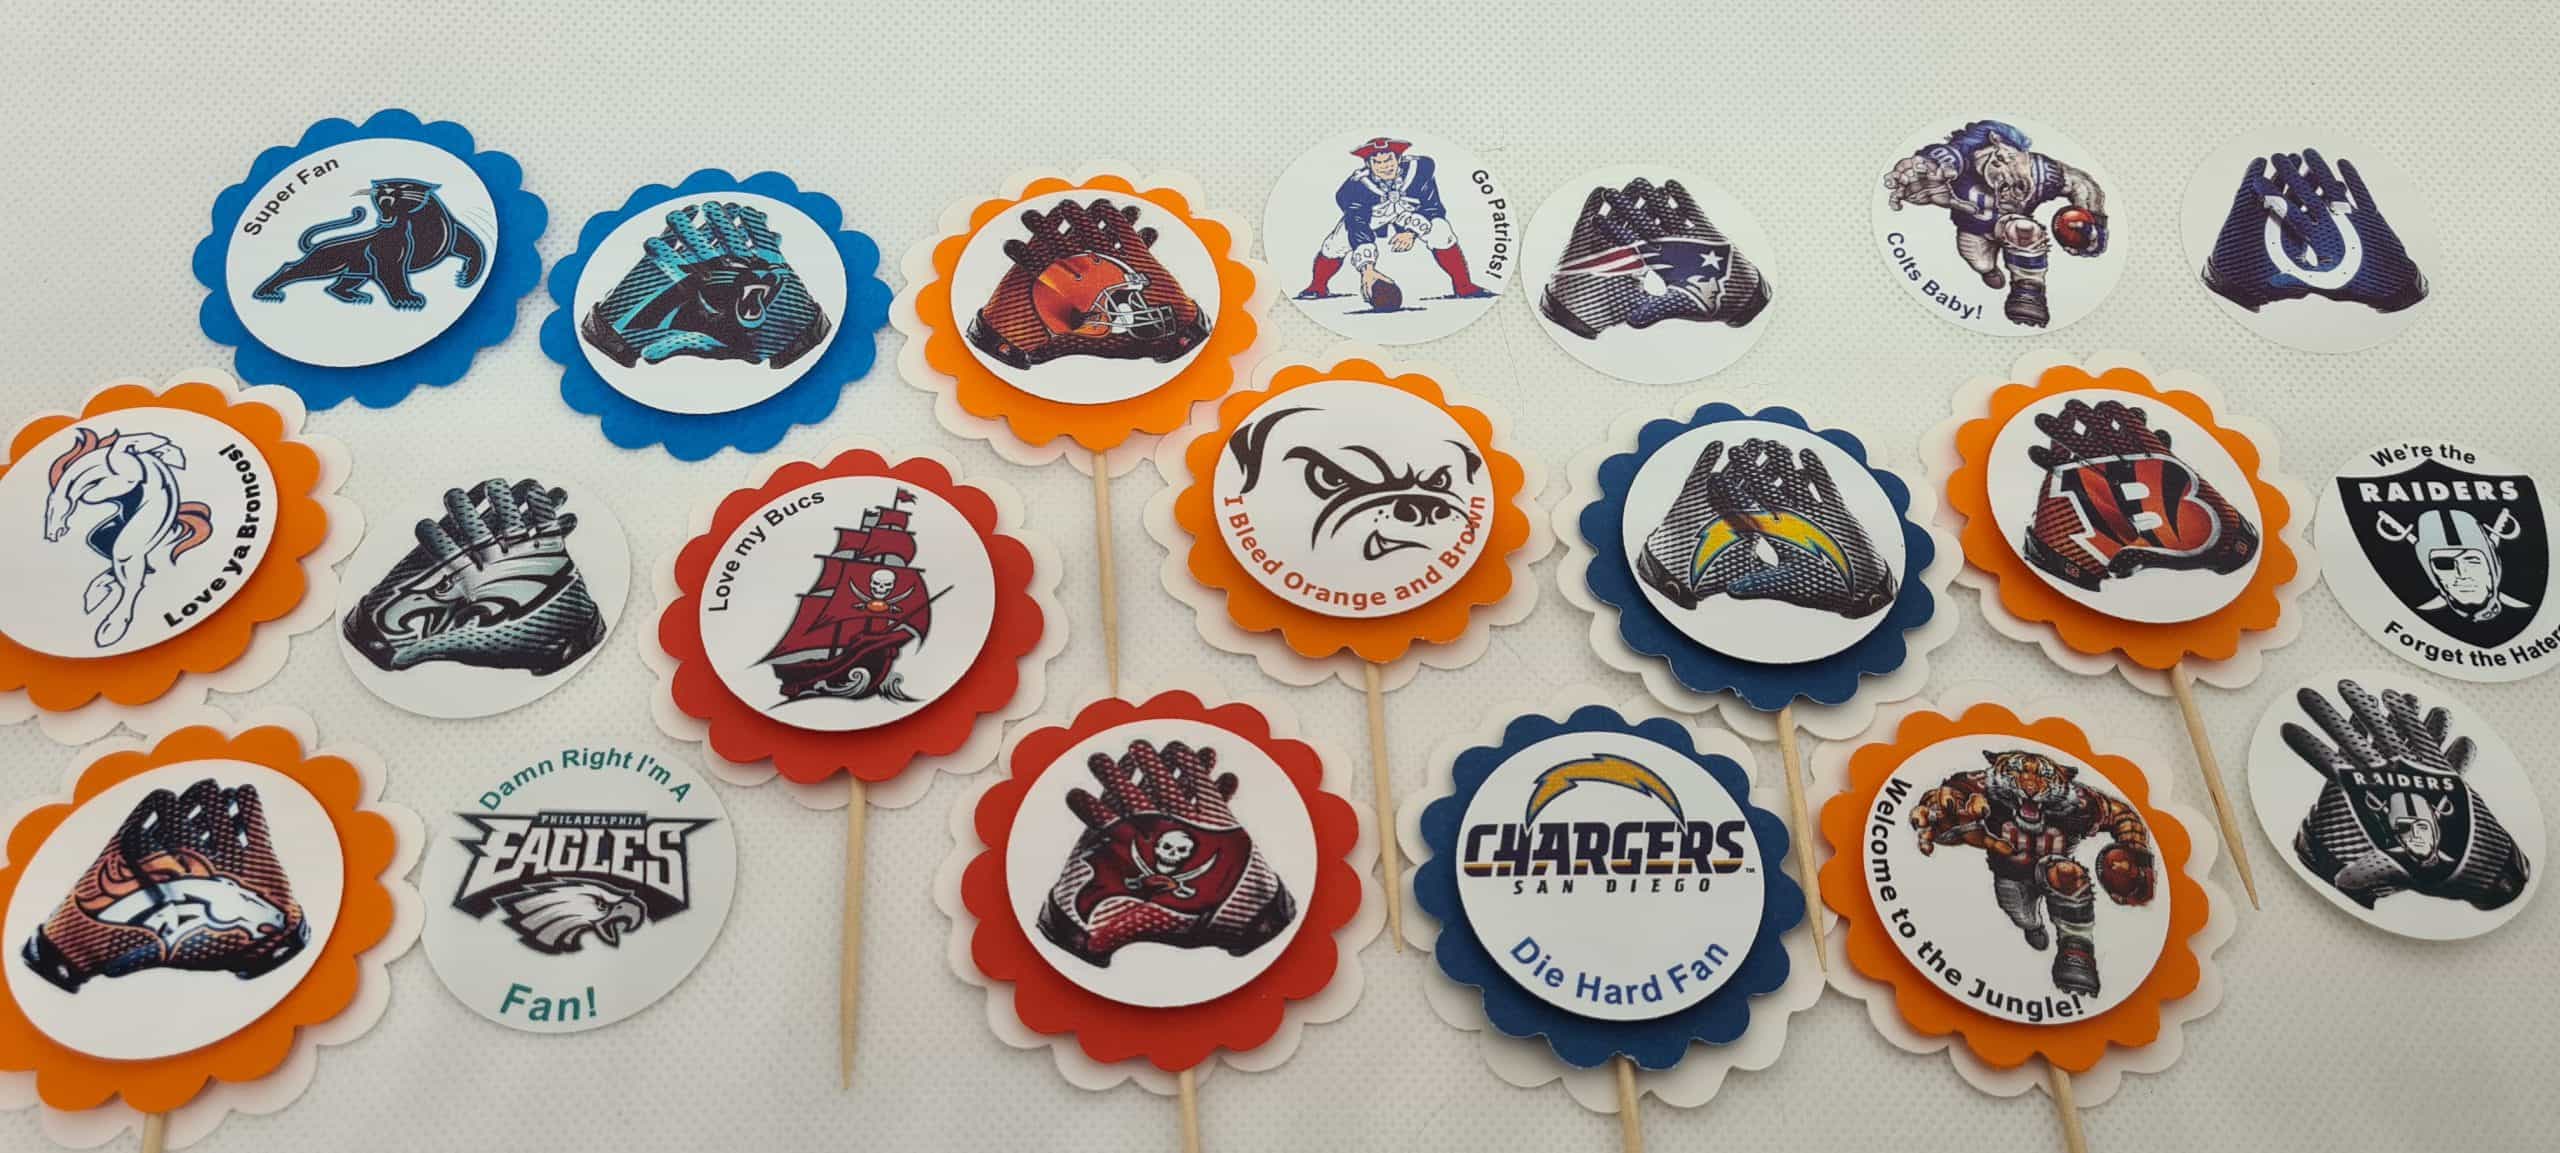 Football Cupcake Toppers ANY TEAM Personalized Super Bowl Party Set of 12